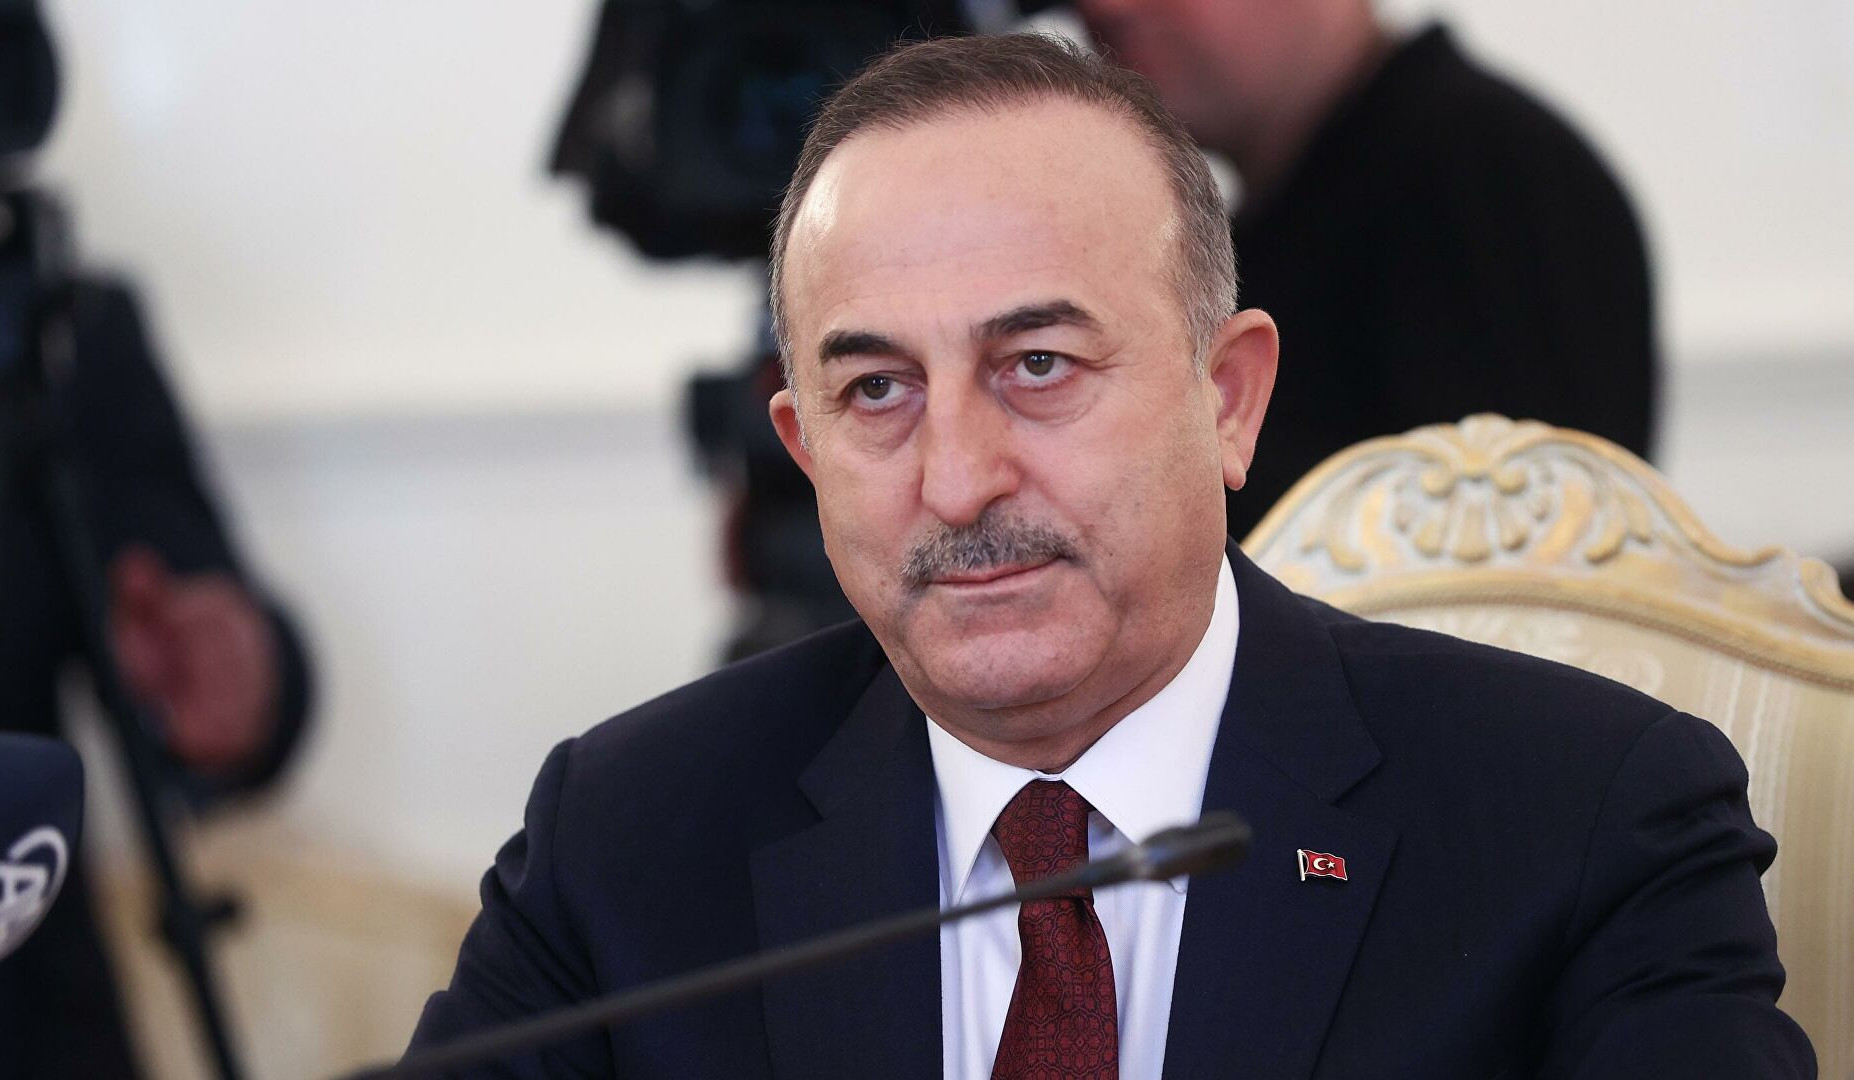 We have a principled stance and we are supporting Ukraine's territorial integrity Cavusoglu